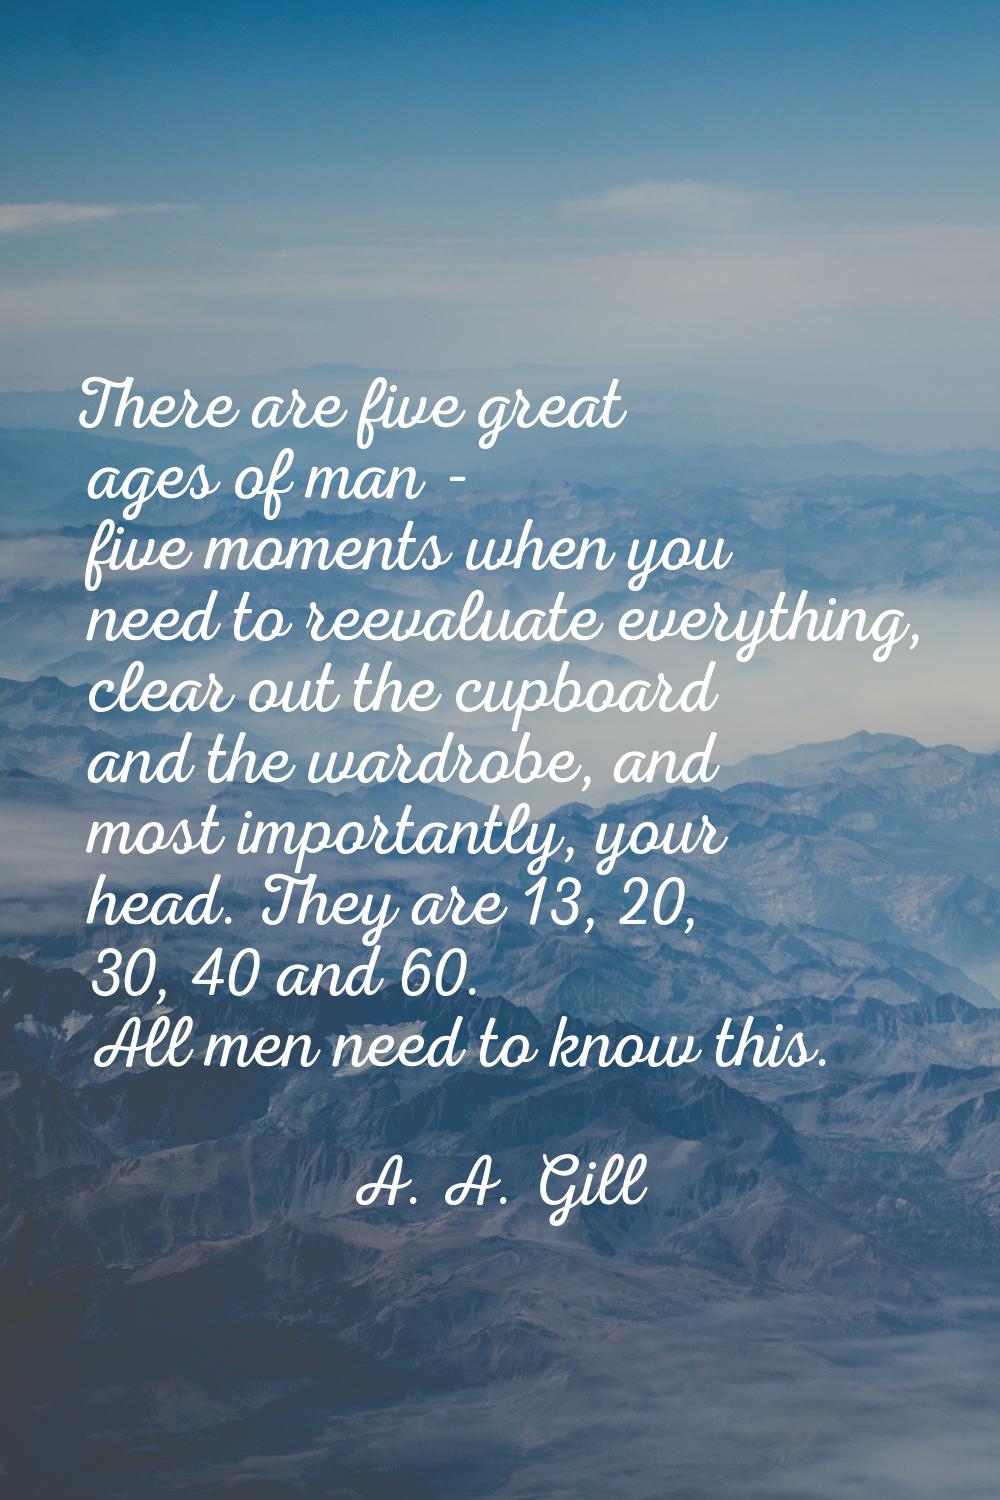 There are five great ages of man - five moments when you need to reevaluate everything, clear out t